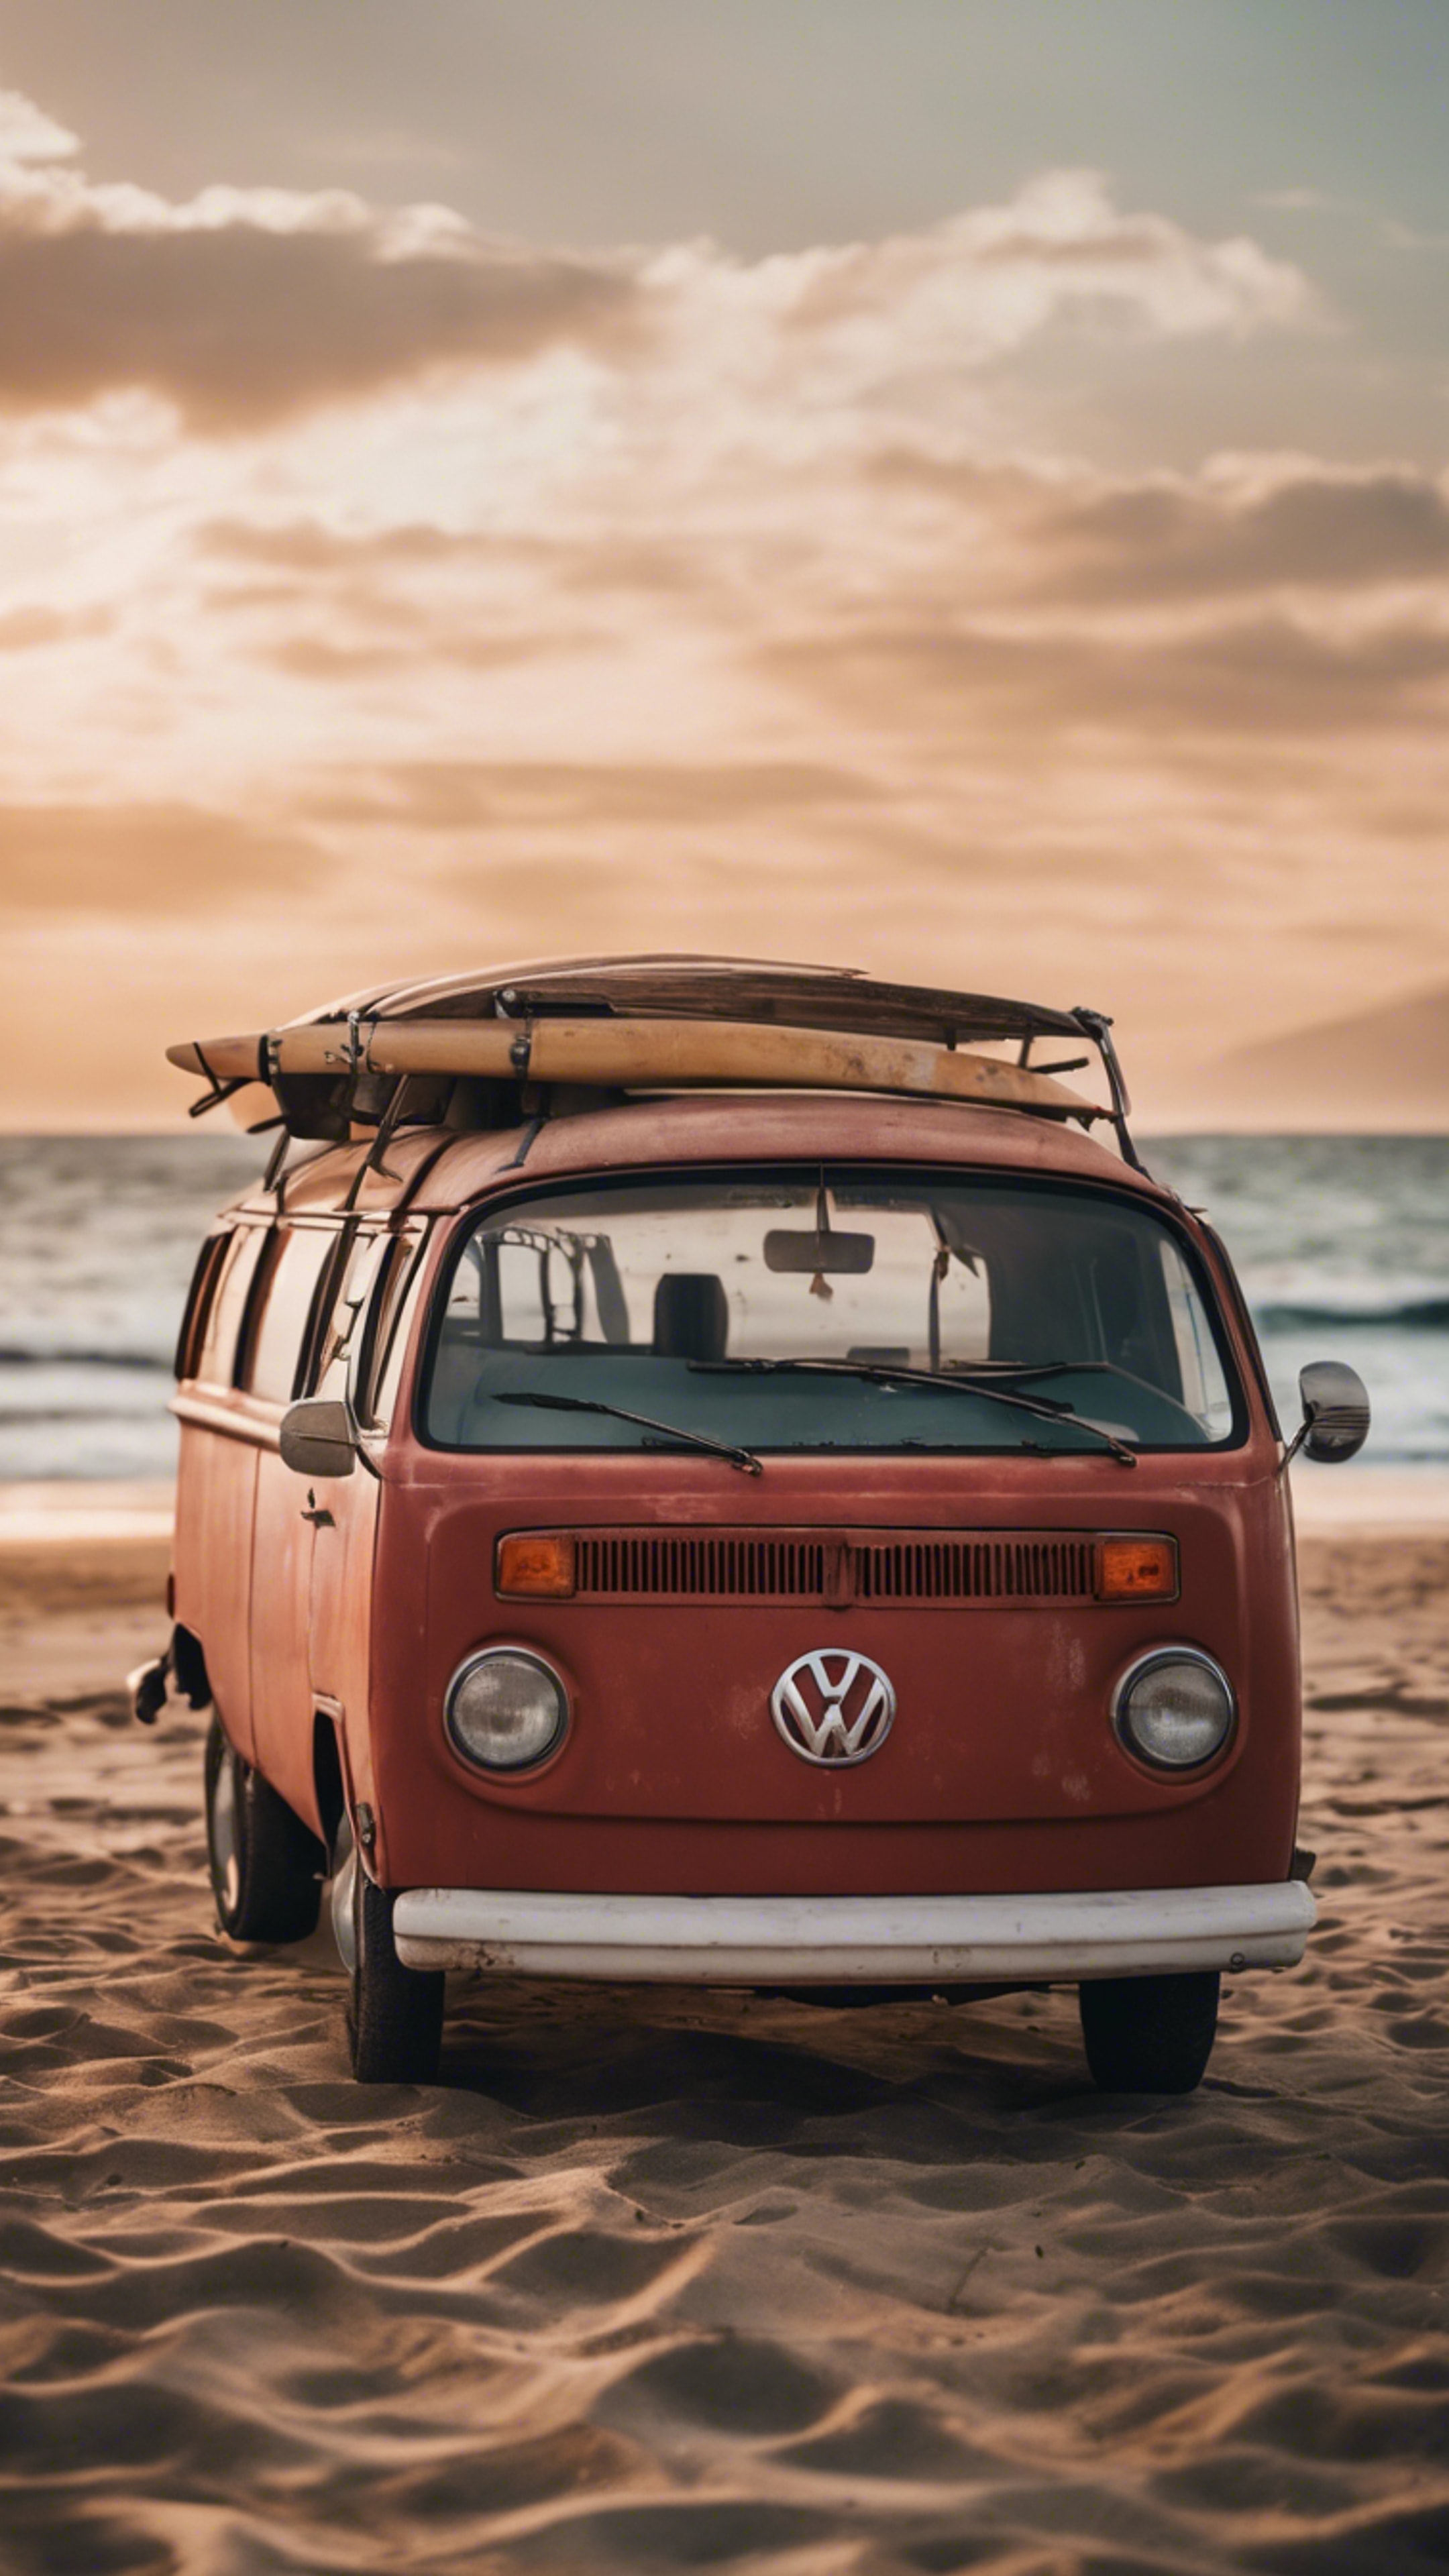 An old, rusted red Volkswagen van parked at a beach with the sunset in the backdrop, surfboards leaning against it. Tapeta[f96813b3e584499cadbf]